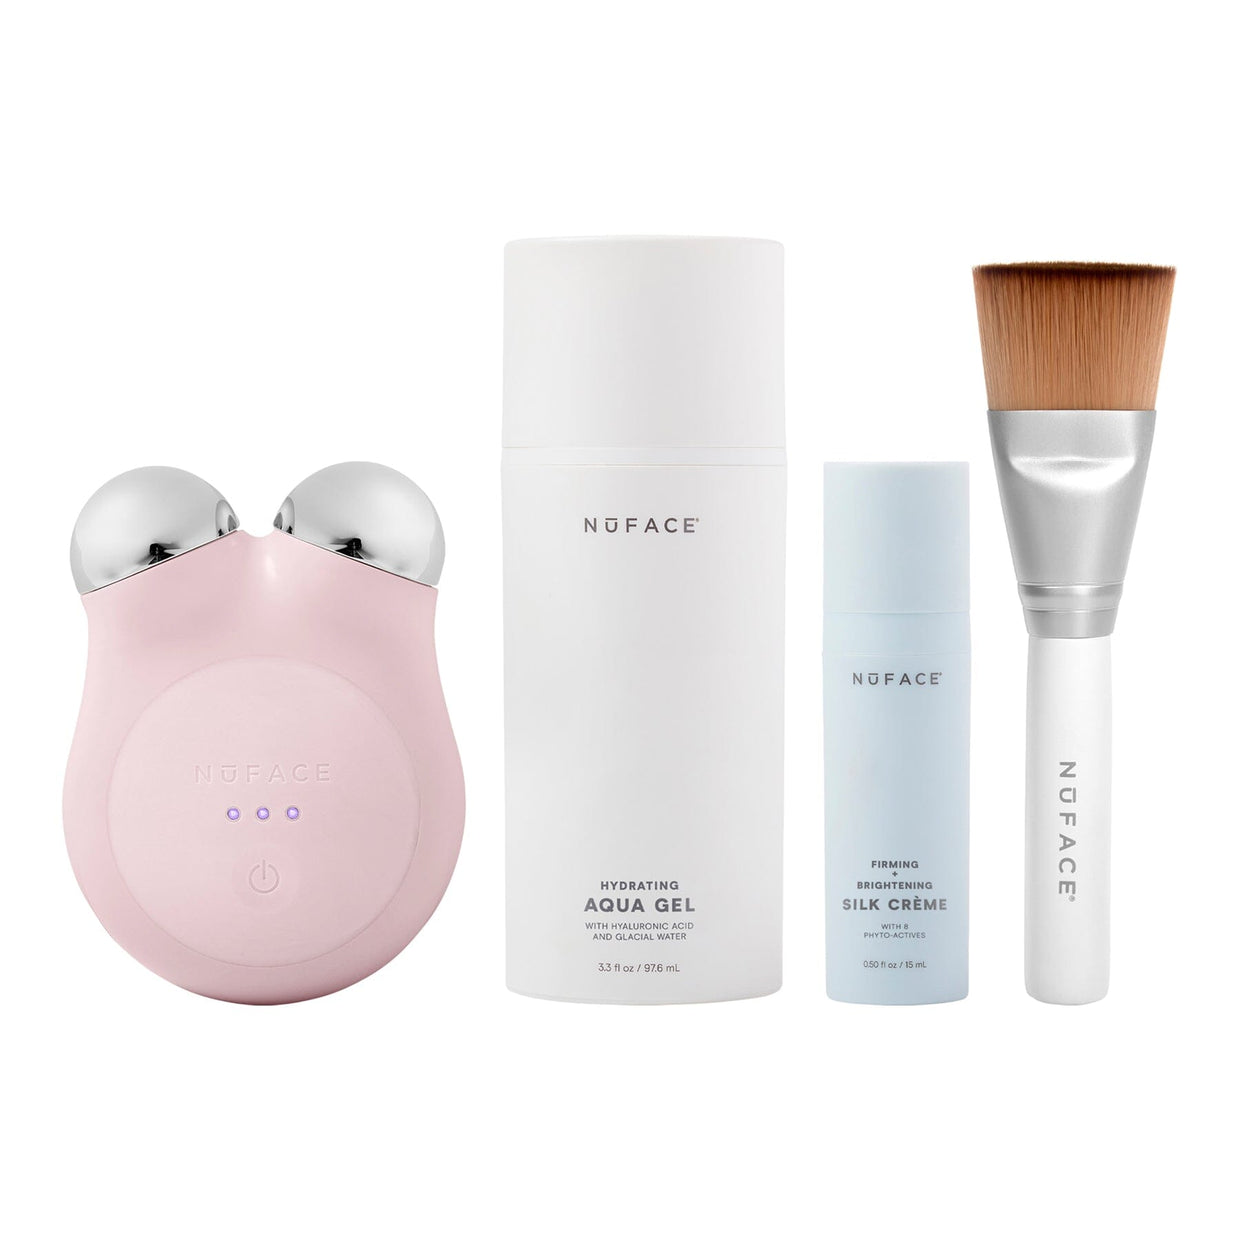 NuFACE MINI+ Starter Kit in Sandy Rose NuFACE Shop at Exclusive Beauty Club